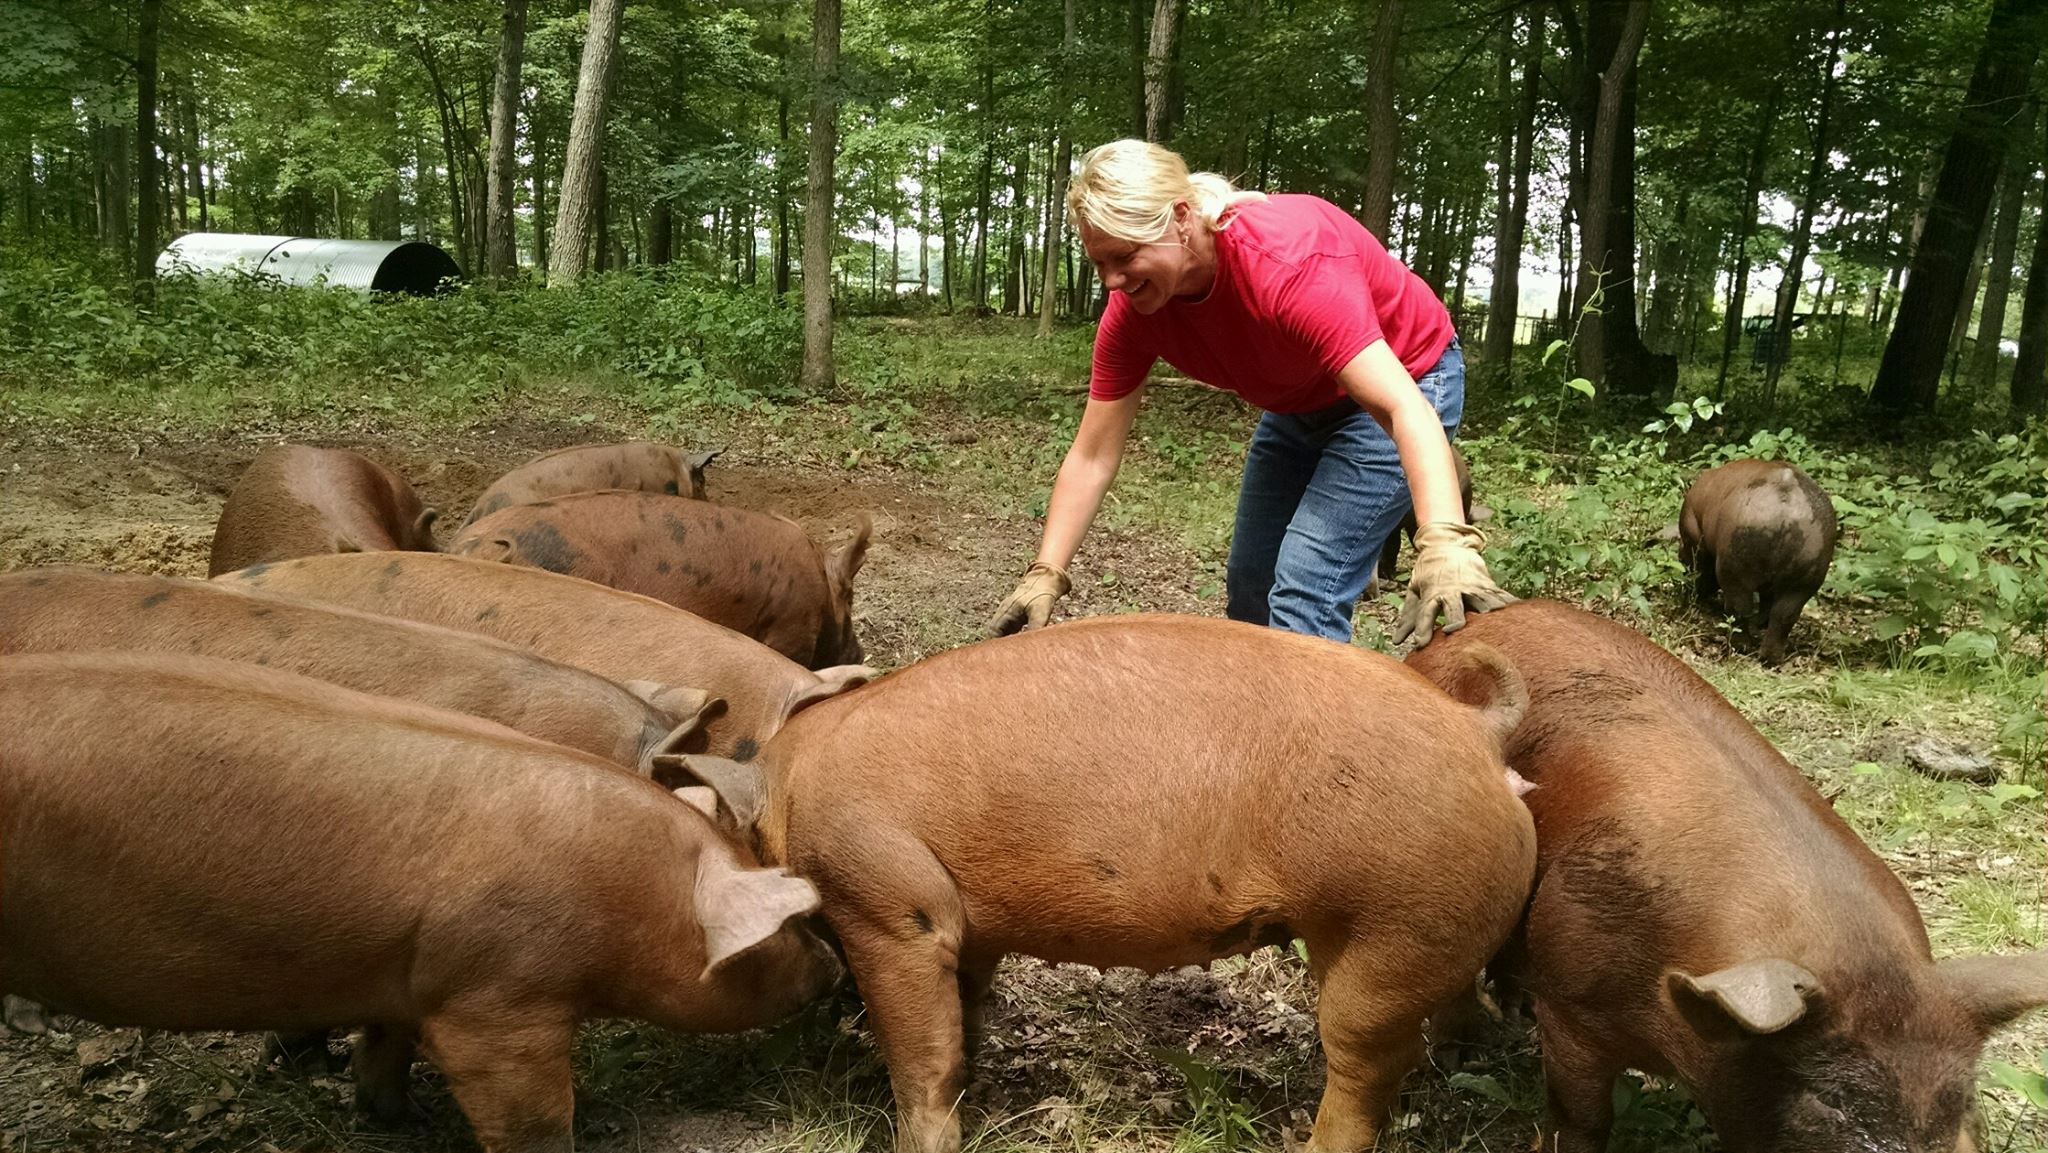 Bonnie with Pigs